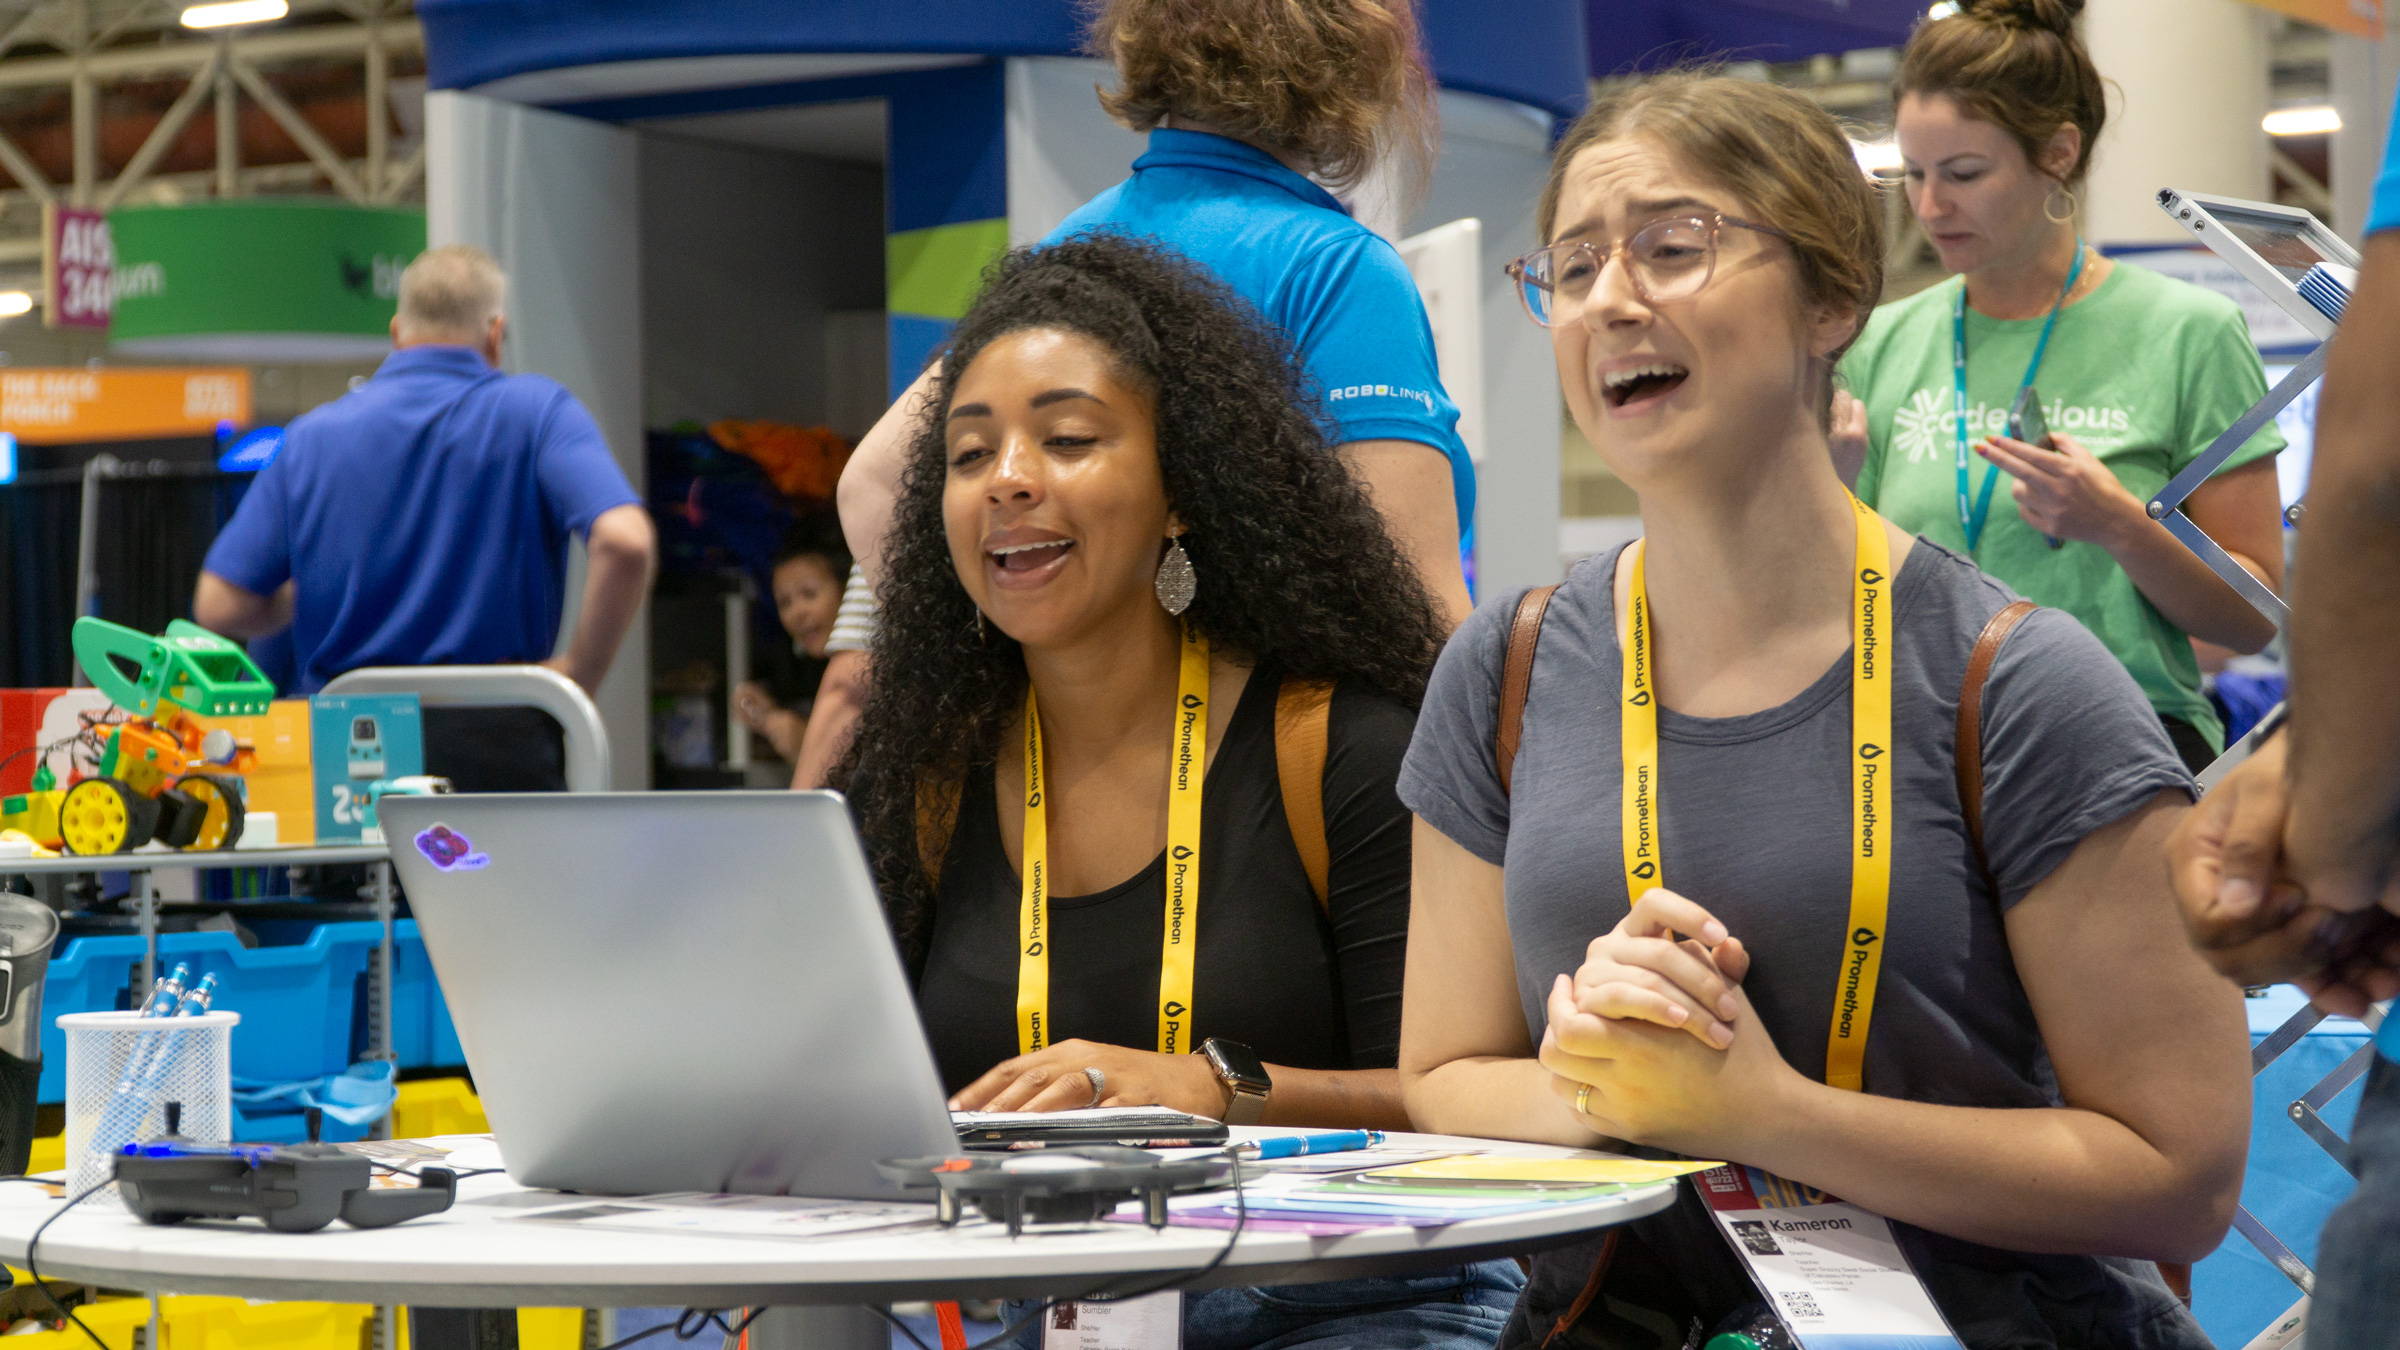 Two teachers react to drones flying at ISTE 2022 booth demo